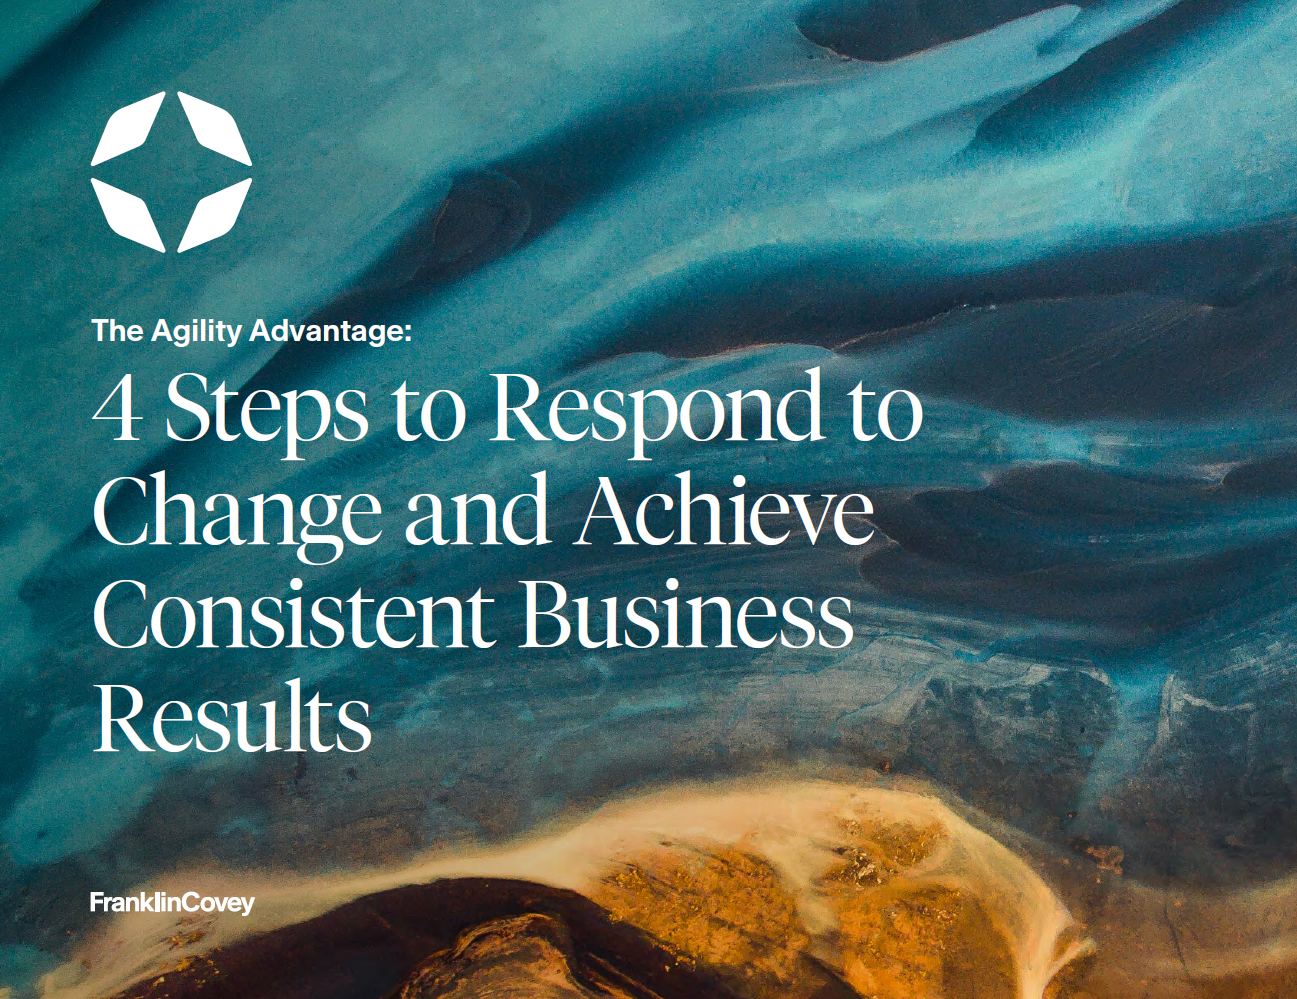 Guide: The Agility Advantage: 4 Steps To Respond To Change And Achieve Consistent Business Results